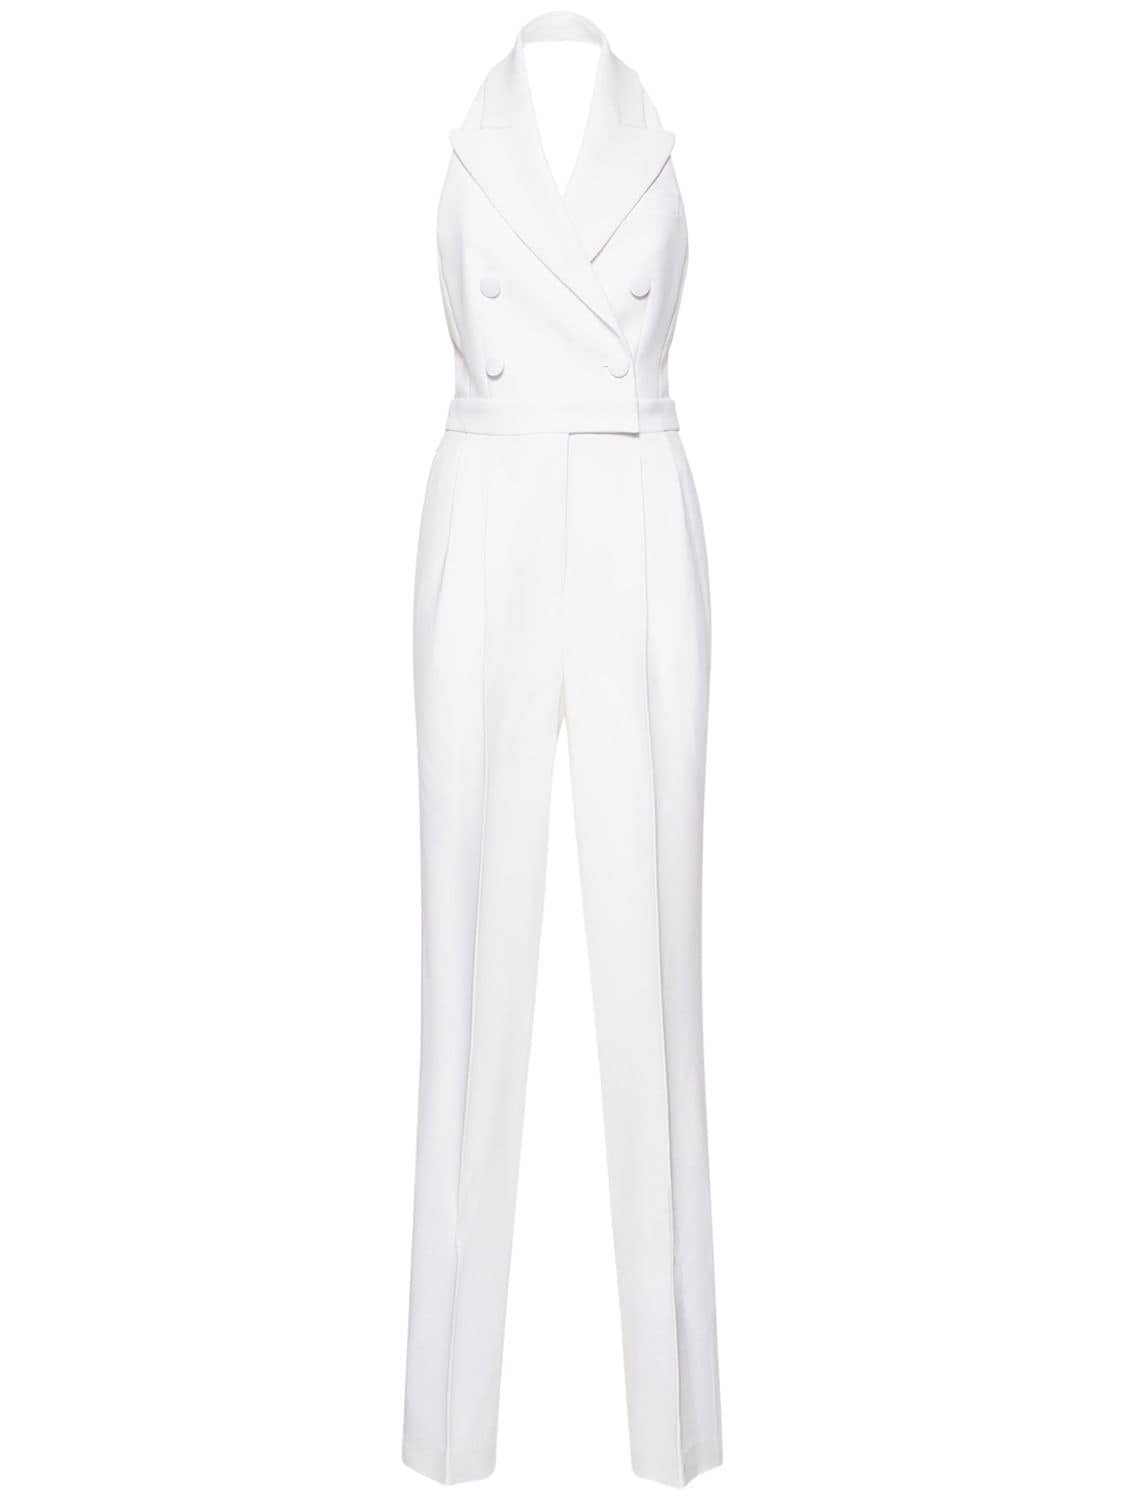 MICHAEL KORS COLLECTION Crepe Sable Halter Neck Tuxedo Jumpsuit in white